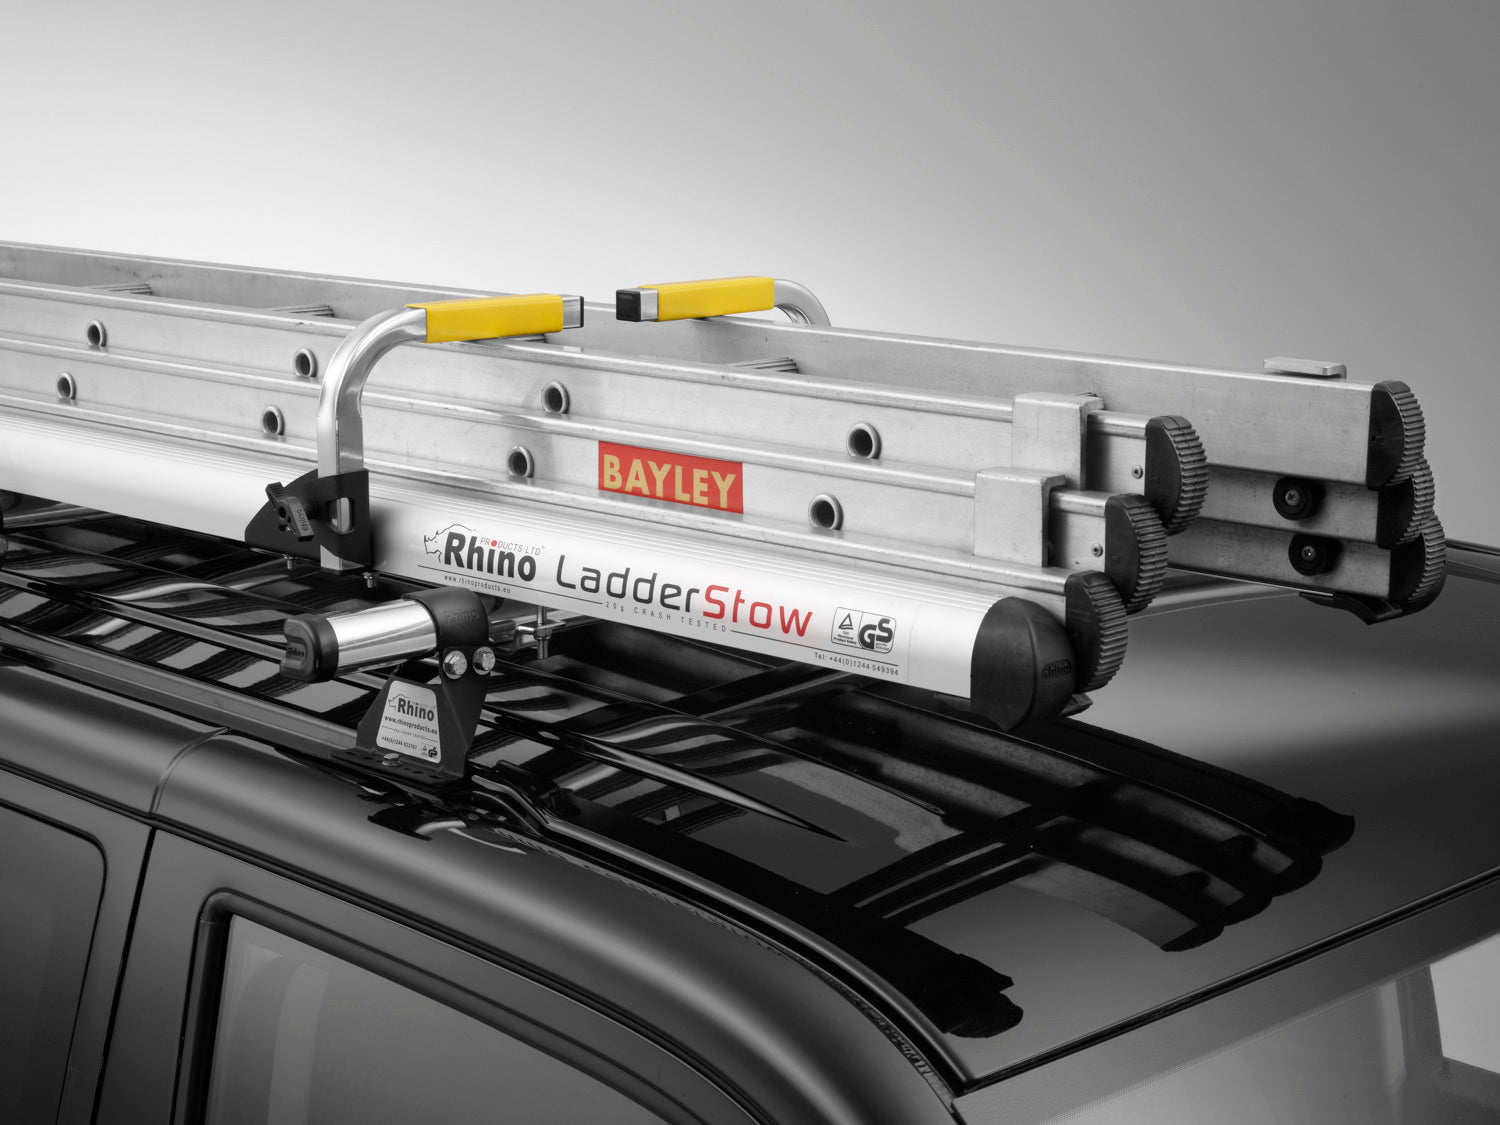 3 Metre Rhino LadderStow Ladder Guide Rails For Universal Roof Bars